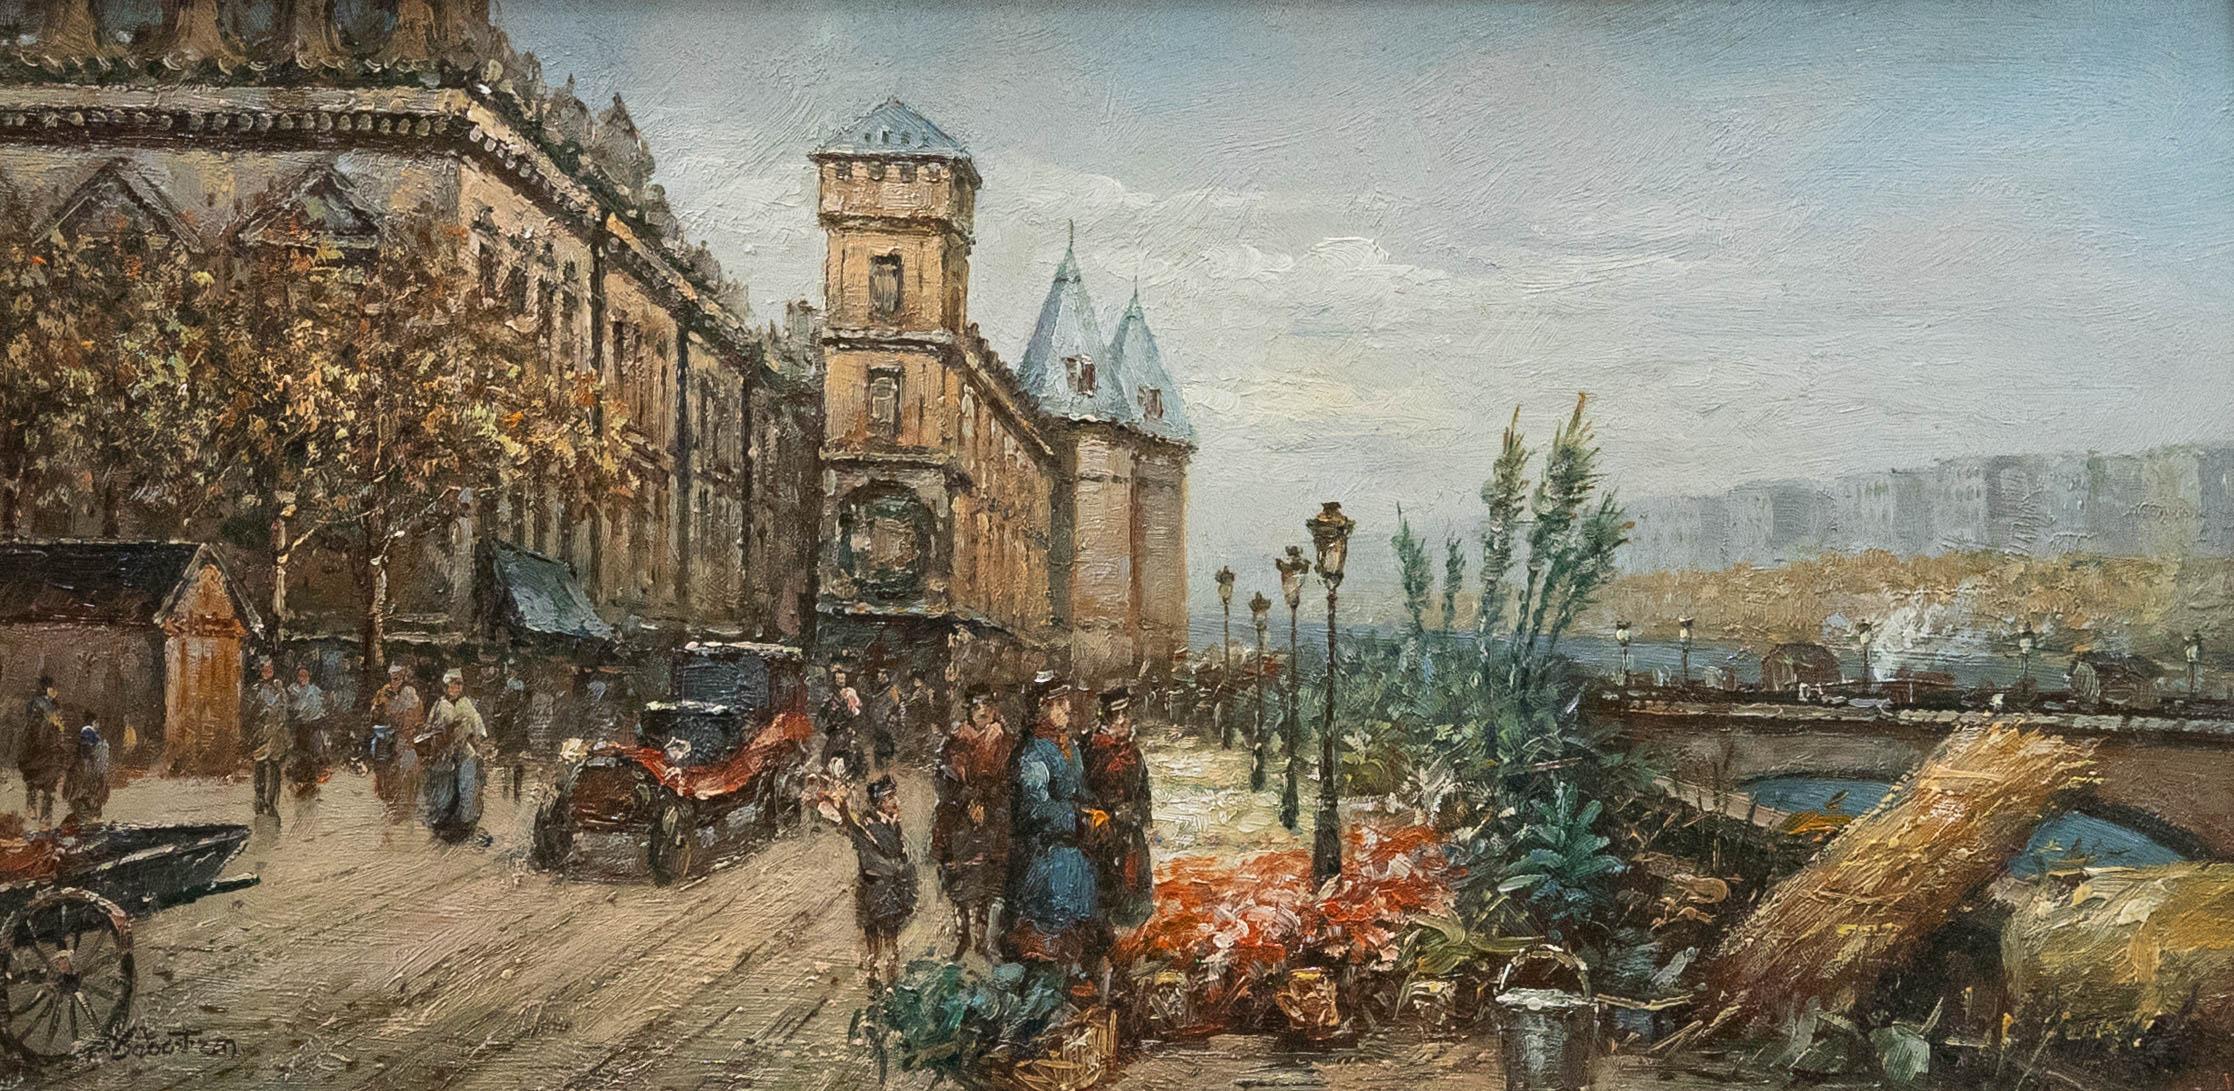 Framed 20th Century Oil - Flower Market along the Seine - Painting by Unknown